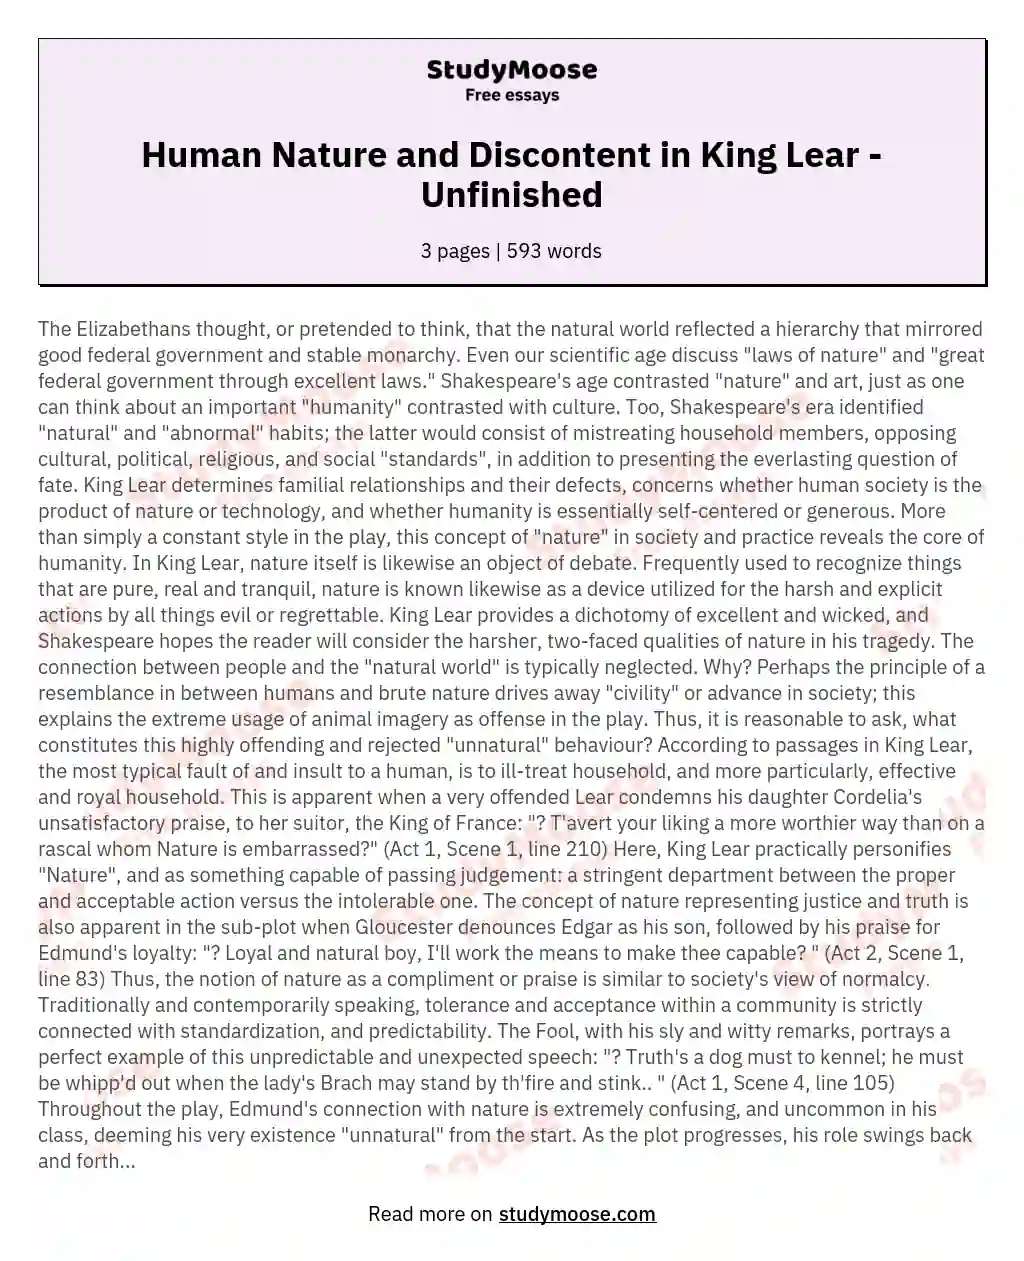 Human Nature and Discontent in King Lear - Unfinished essay